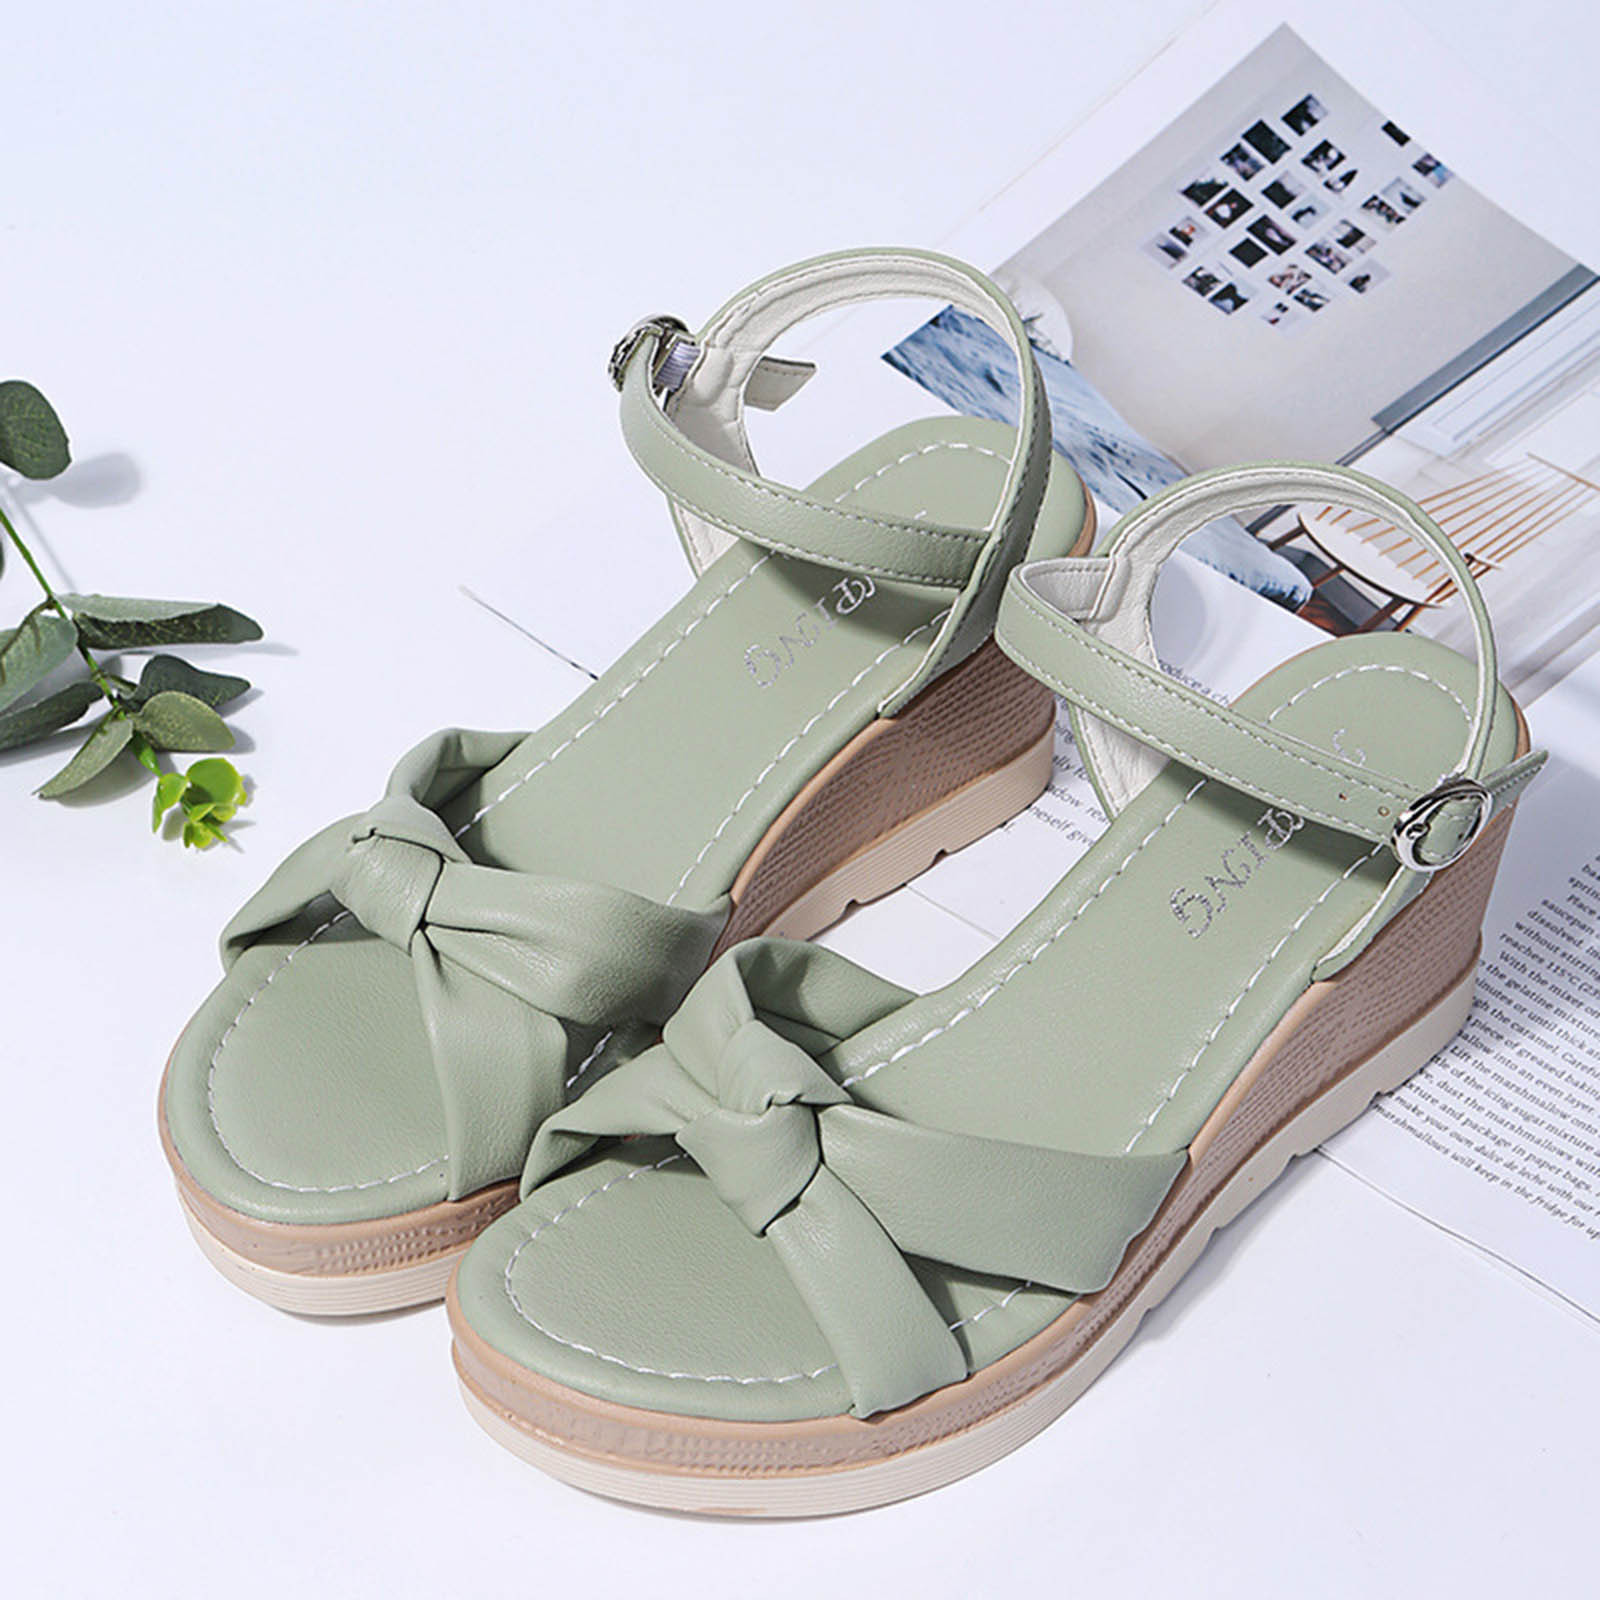 Juebong Wedge Sandals for Womens Dressy Summer Open Toe Ankle Strap ...